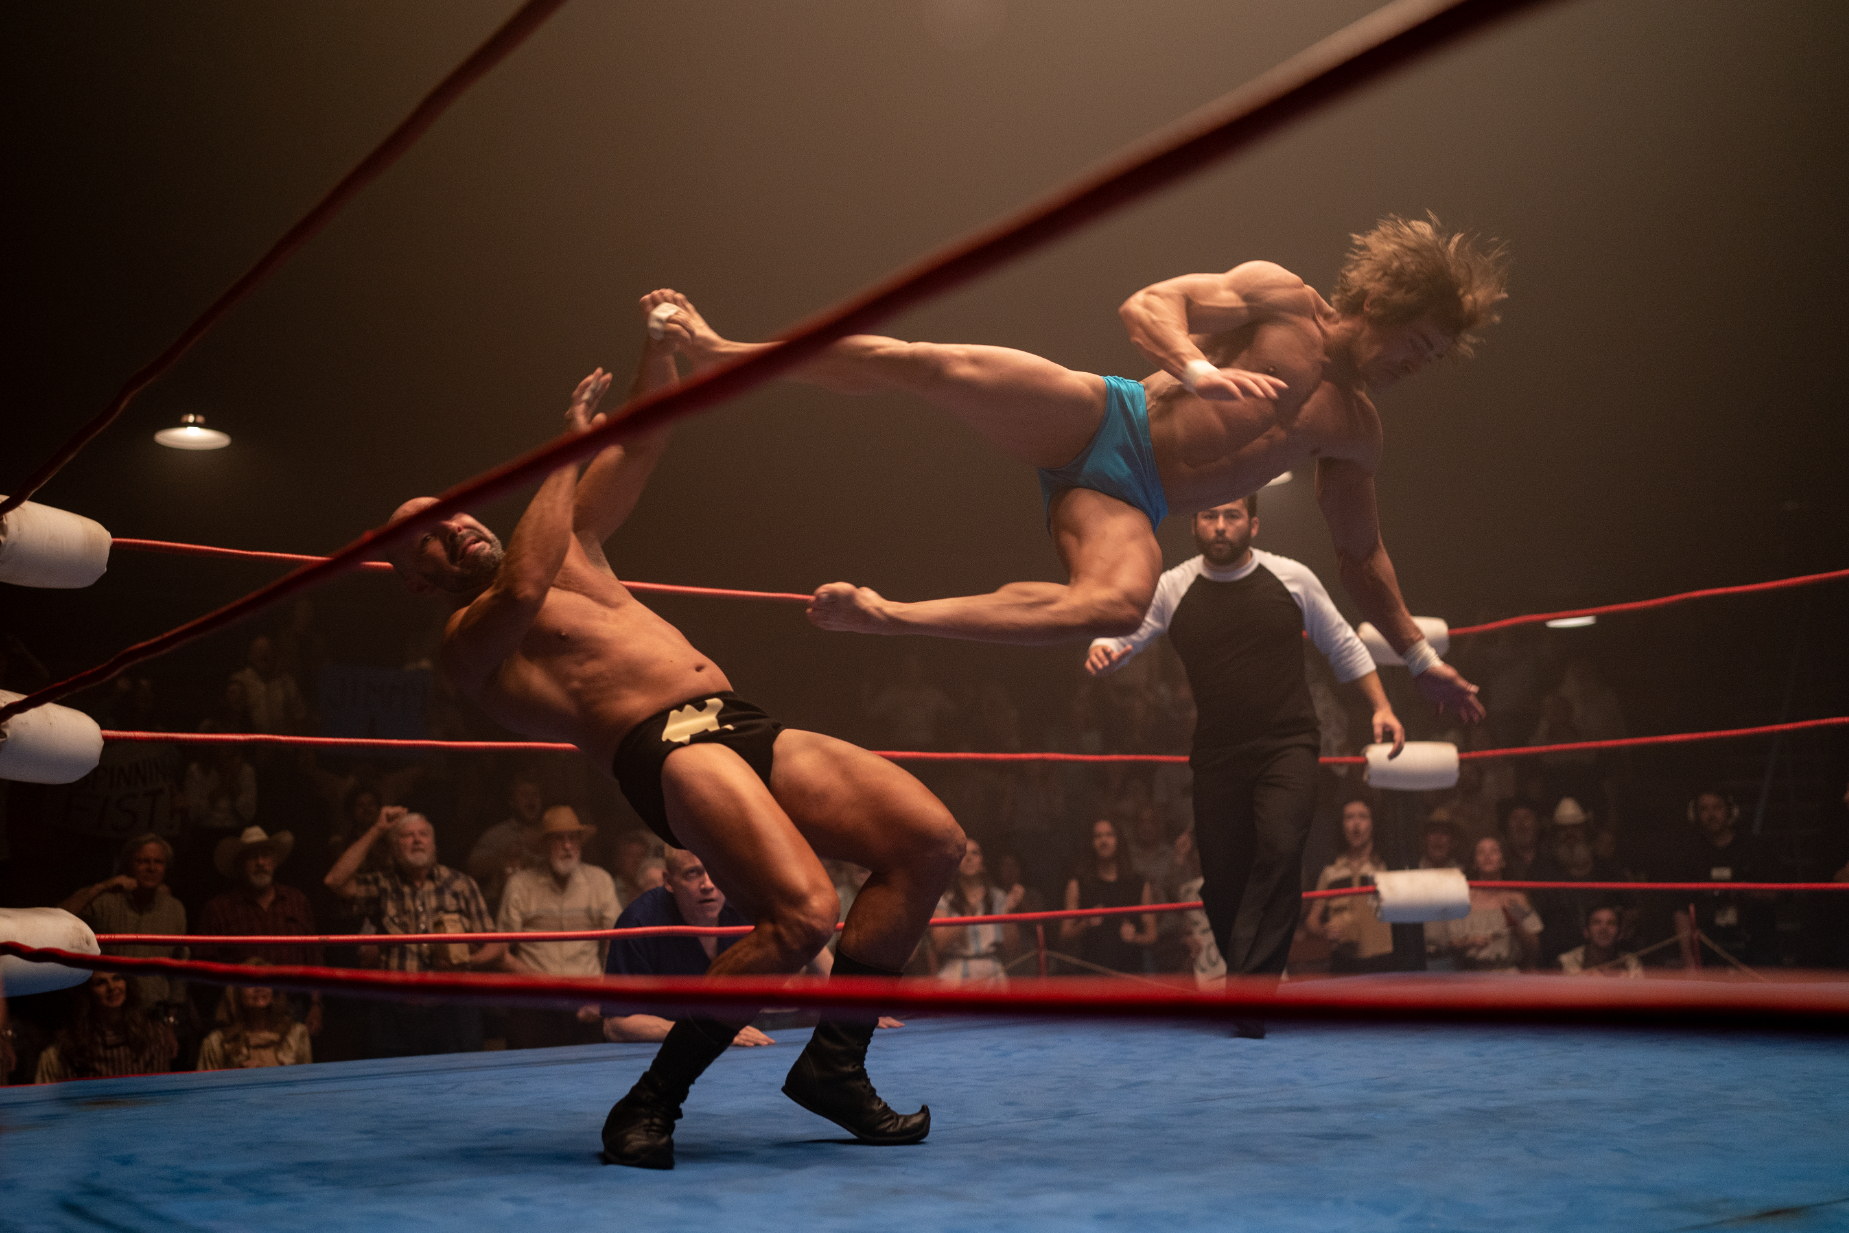 One man jump kicking another in a scene from &quot;The Iron Claw&quot;